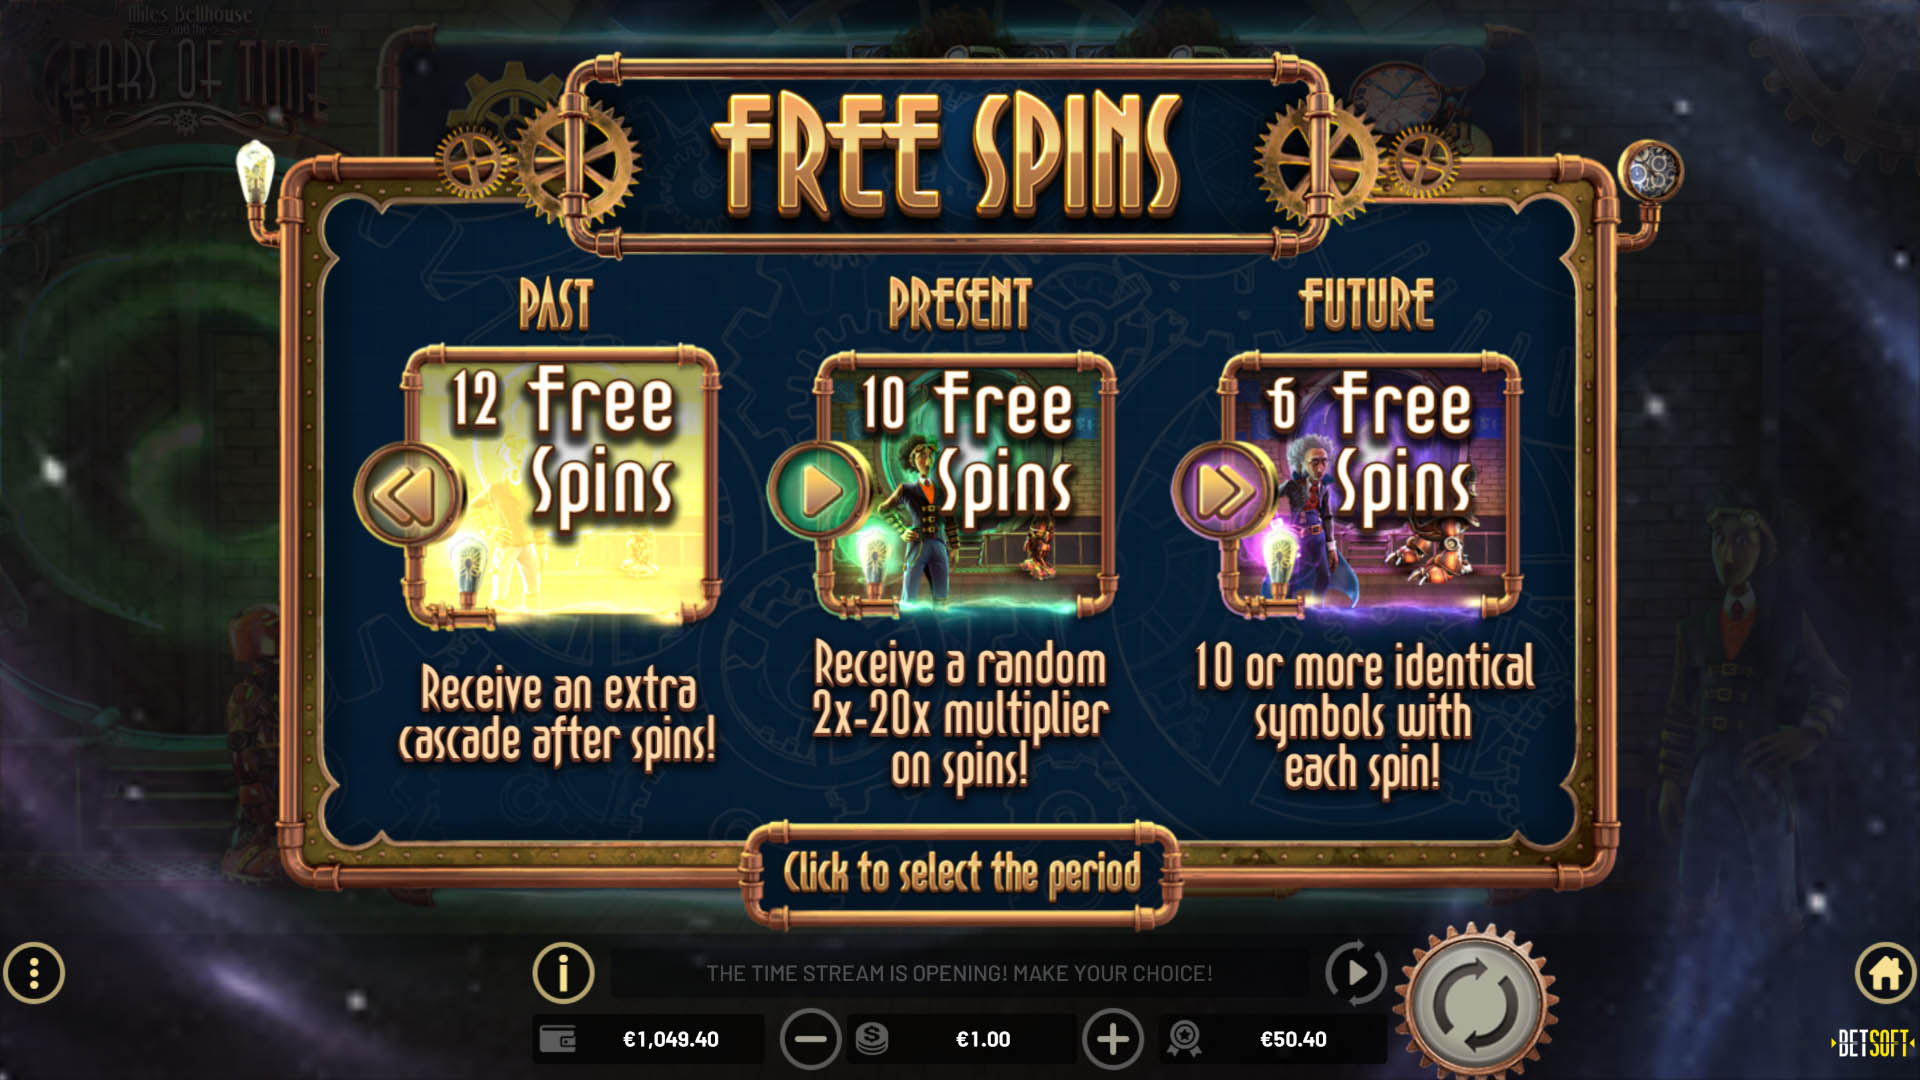 Gears Of Time - Free Spins